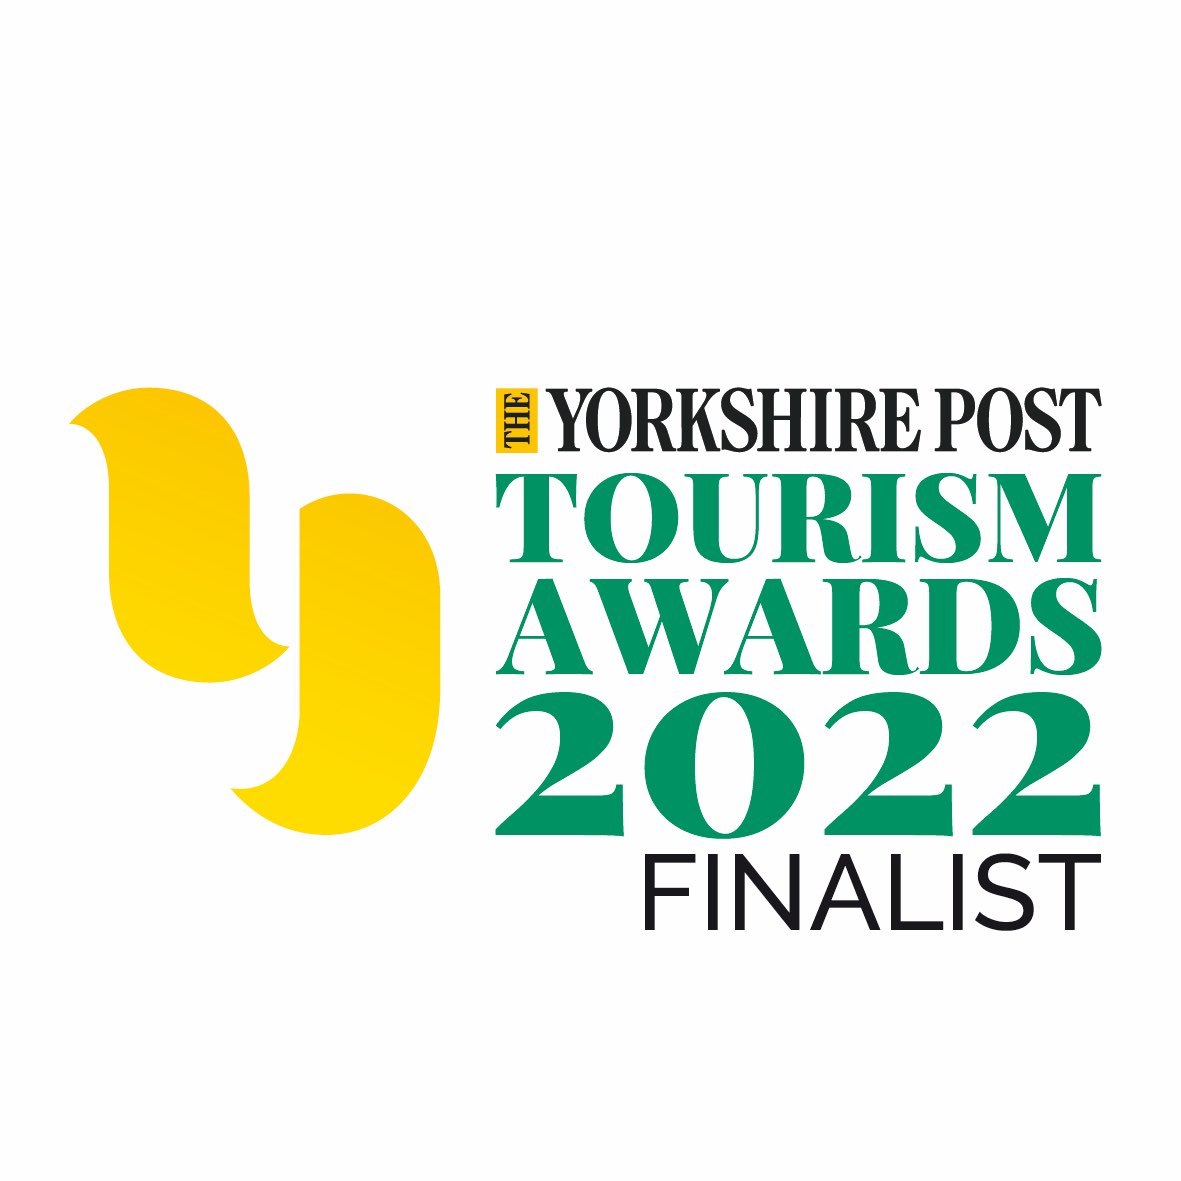 Harrogate Lifestyle Apartments has been shortlisted for the category of Outstanding Customer Service Award in this year’s Yorkshire Tourism Awards 2022. #YPTA22